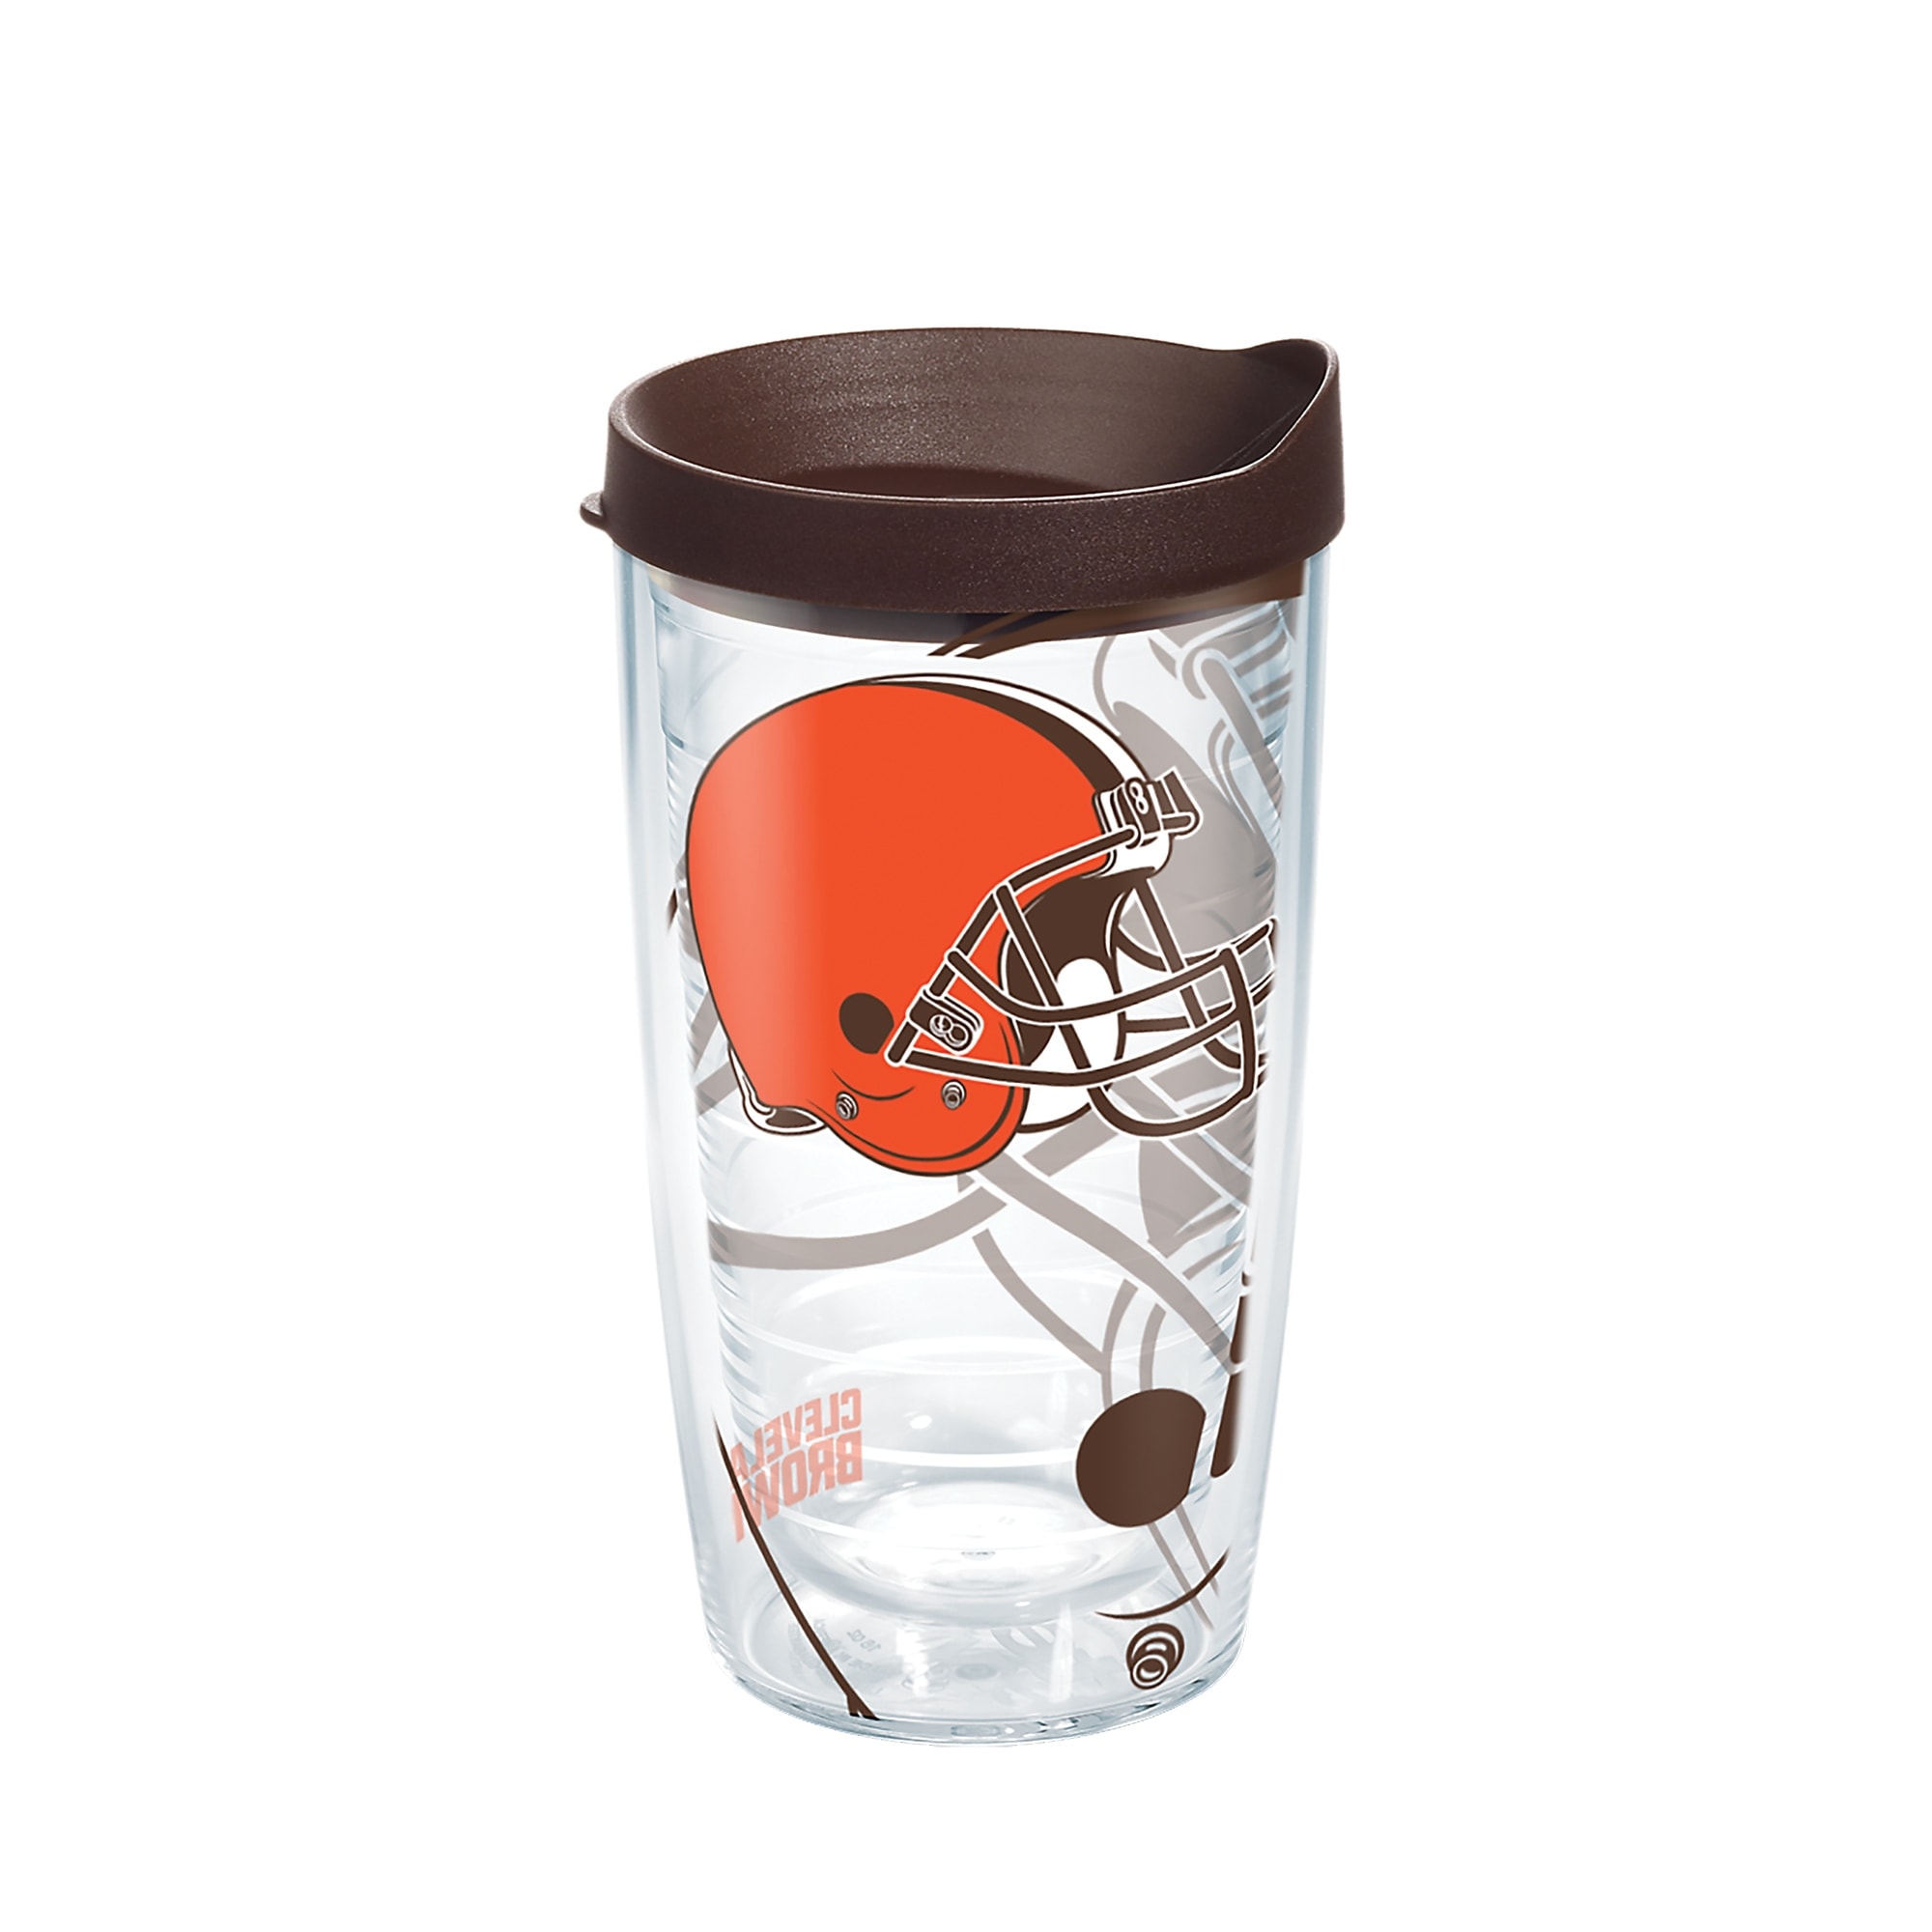 https://ak1.ostkcdn.com/images/products/is/images/direct/5efac501987f5ffd42a8b54ad06c2f059f7a5cc0/NFL-Cleveland-Browns-Genuine-16-oz-Tumbler-with-lid.jpg